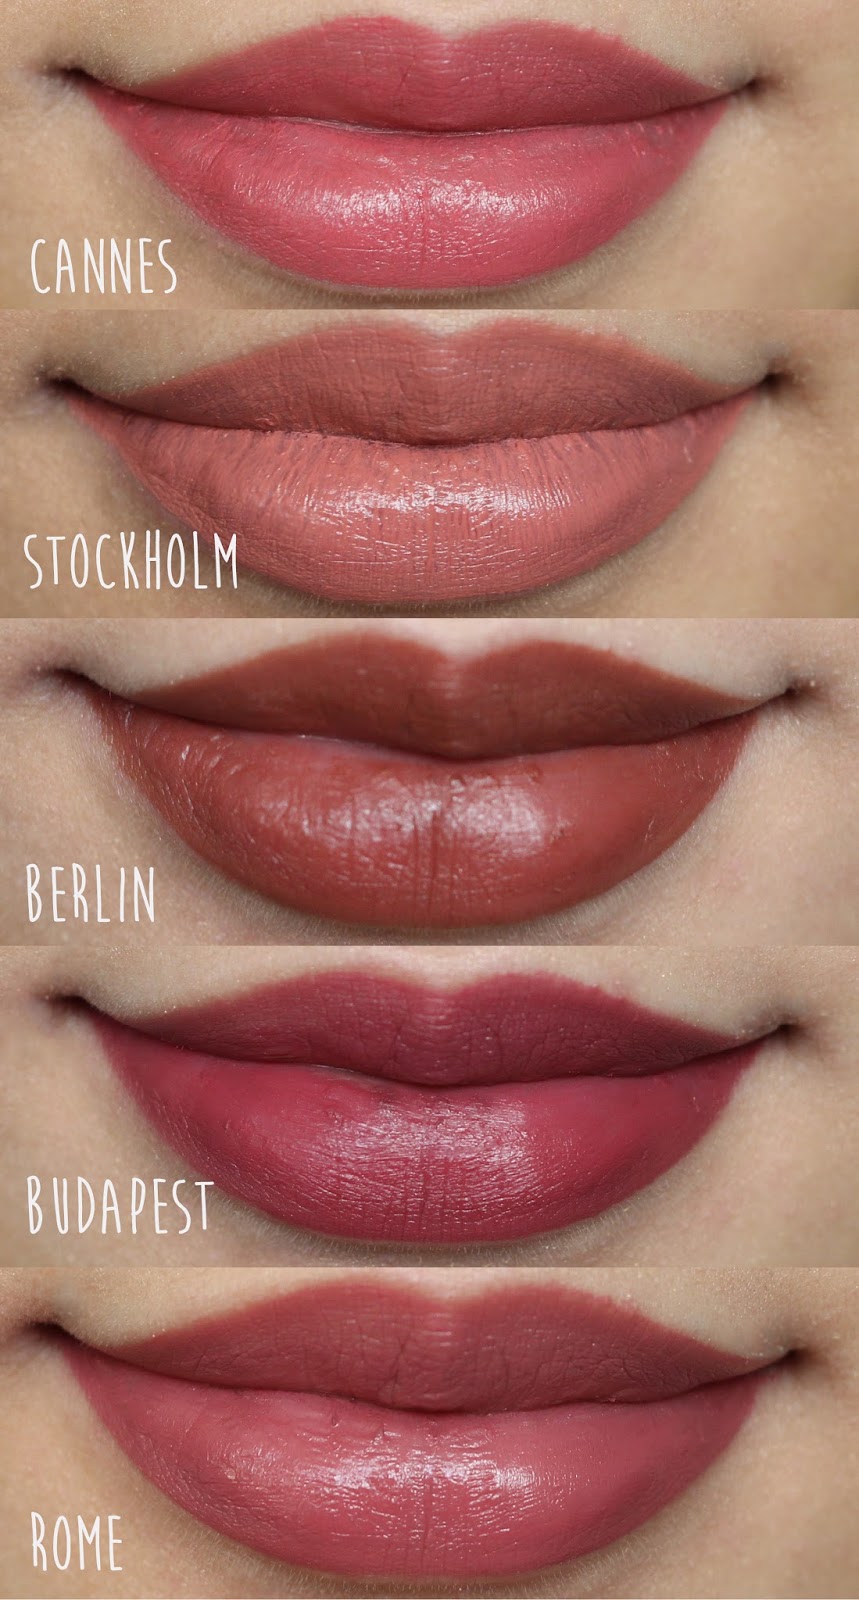 NYX Professional Makeup Soft Matte Lip Cream in Cannes, Stockholm, Berlin, Budapest and Rome swatches and review